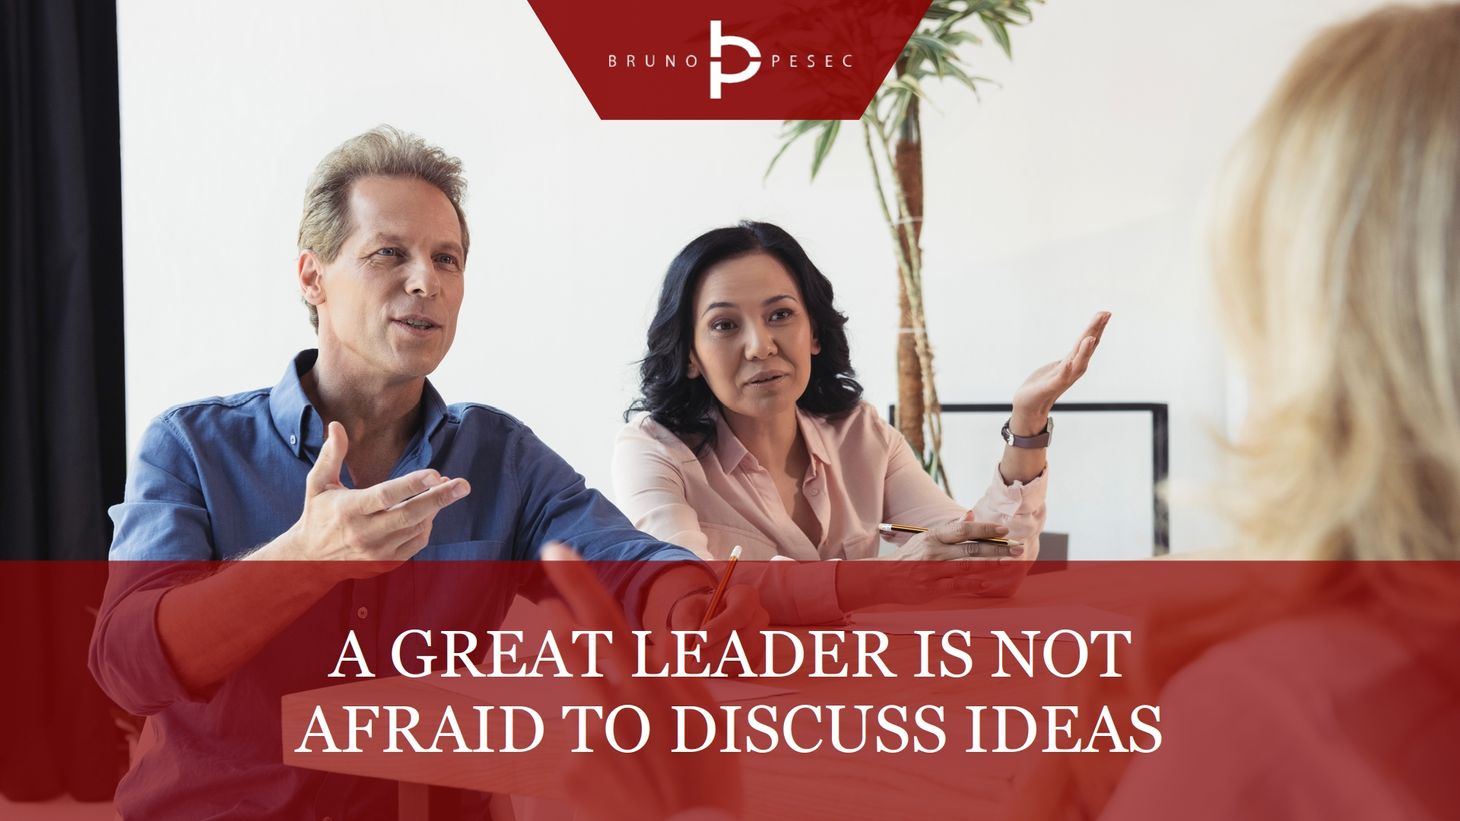 A great leader is not afraid to discuss ideas